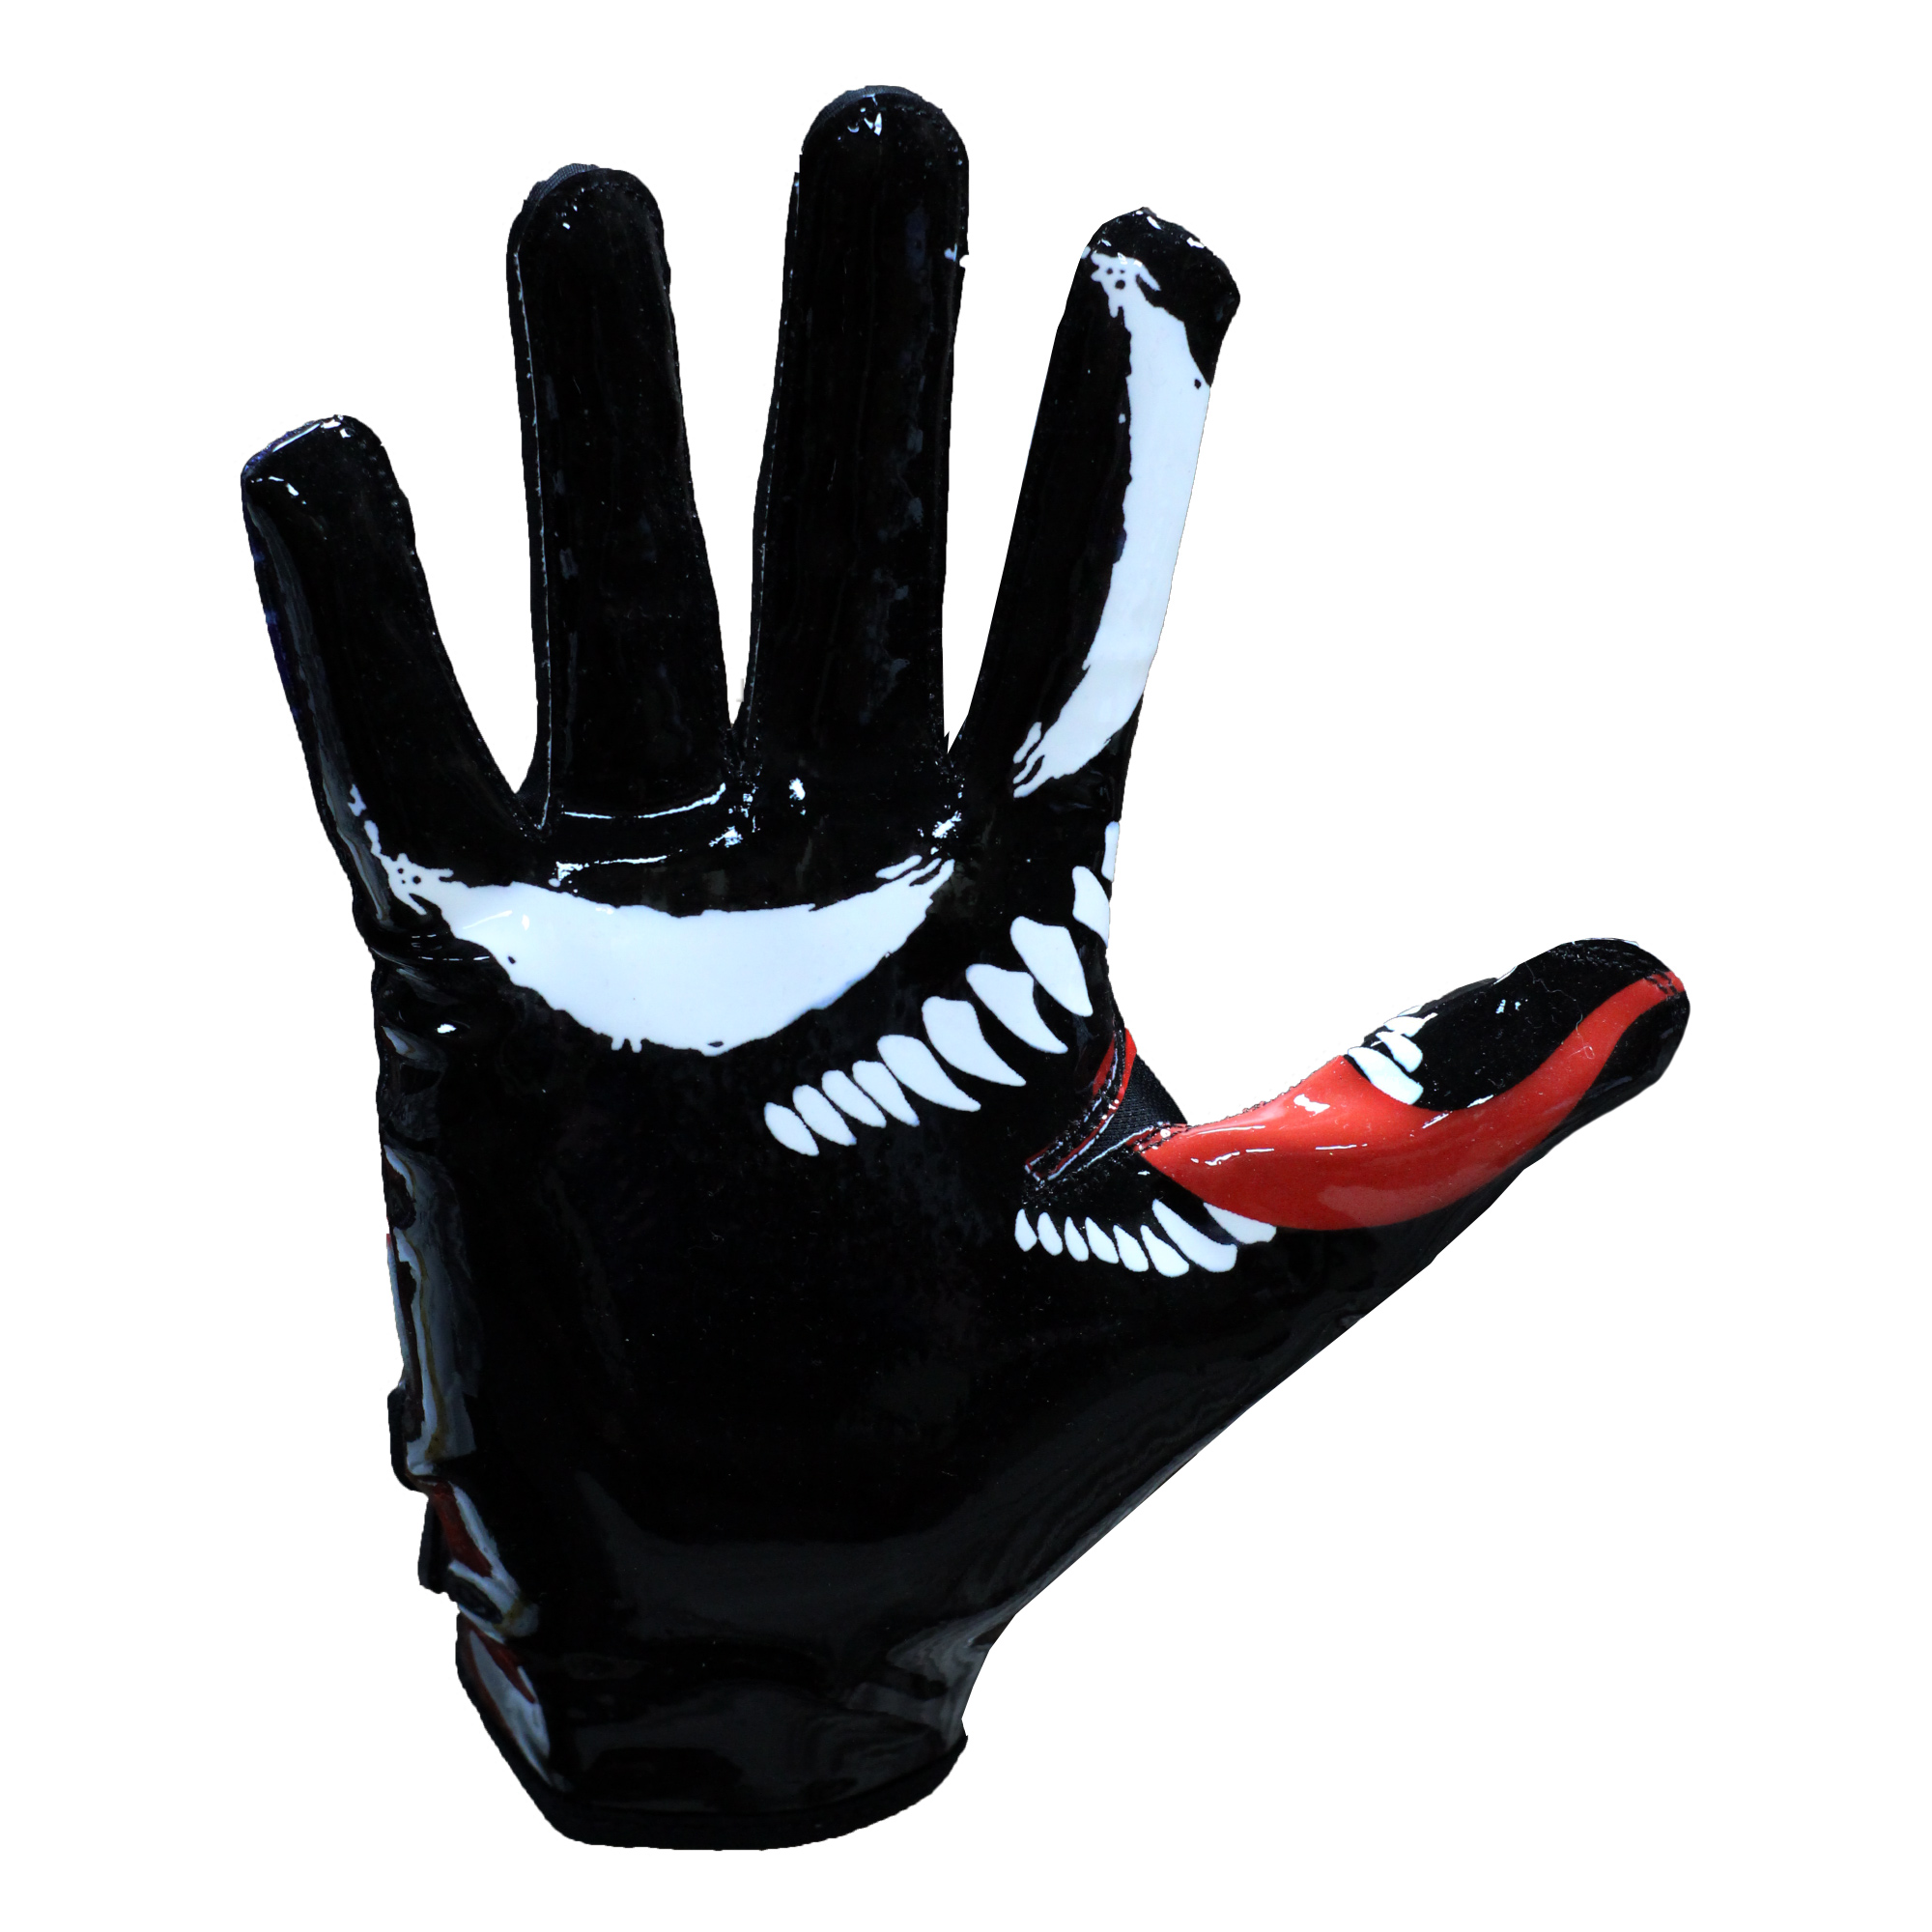 Eternity Gears Villain Football Gloves - Pro Elite Super Sticky Receiver Football Gloves - Adult Sizes - image 5 of 5